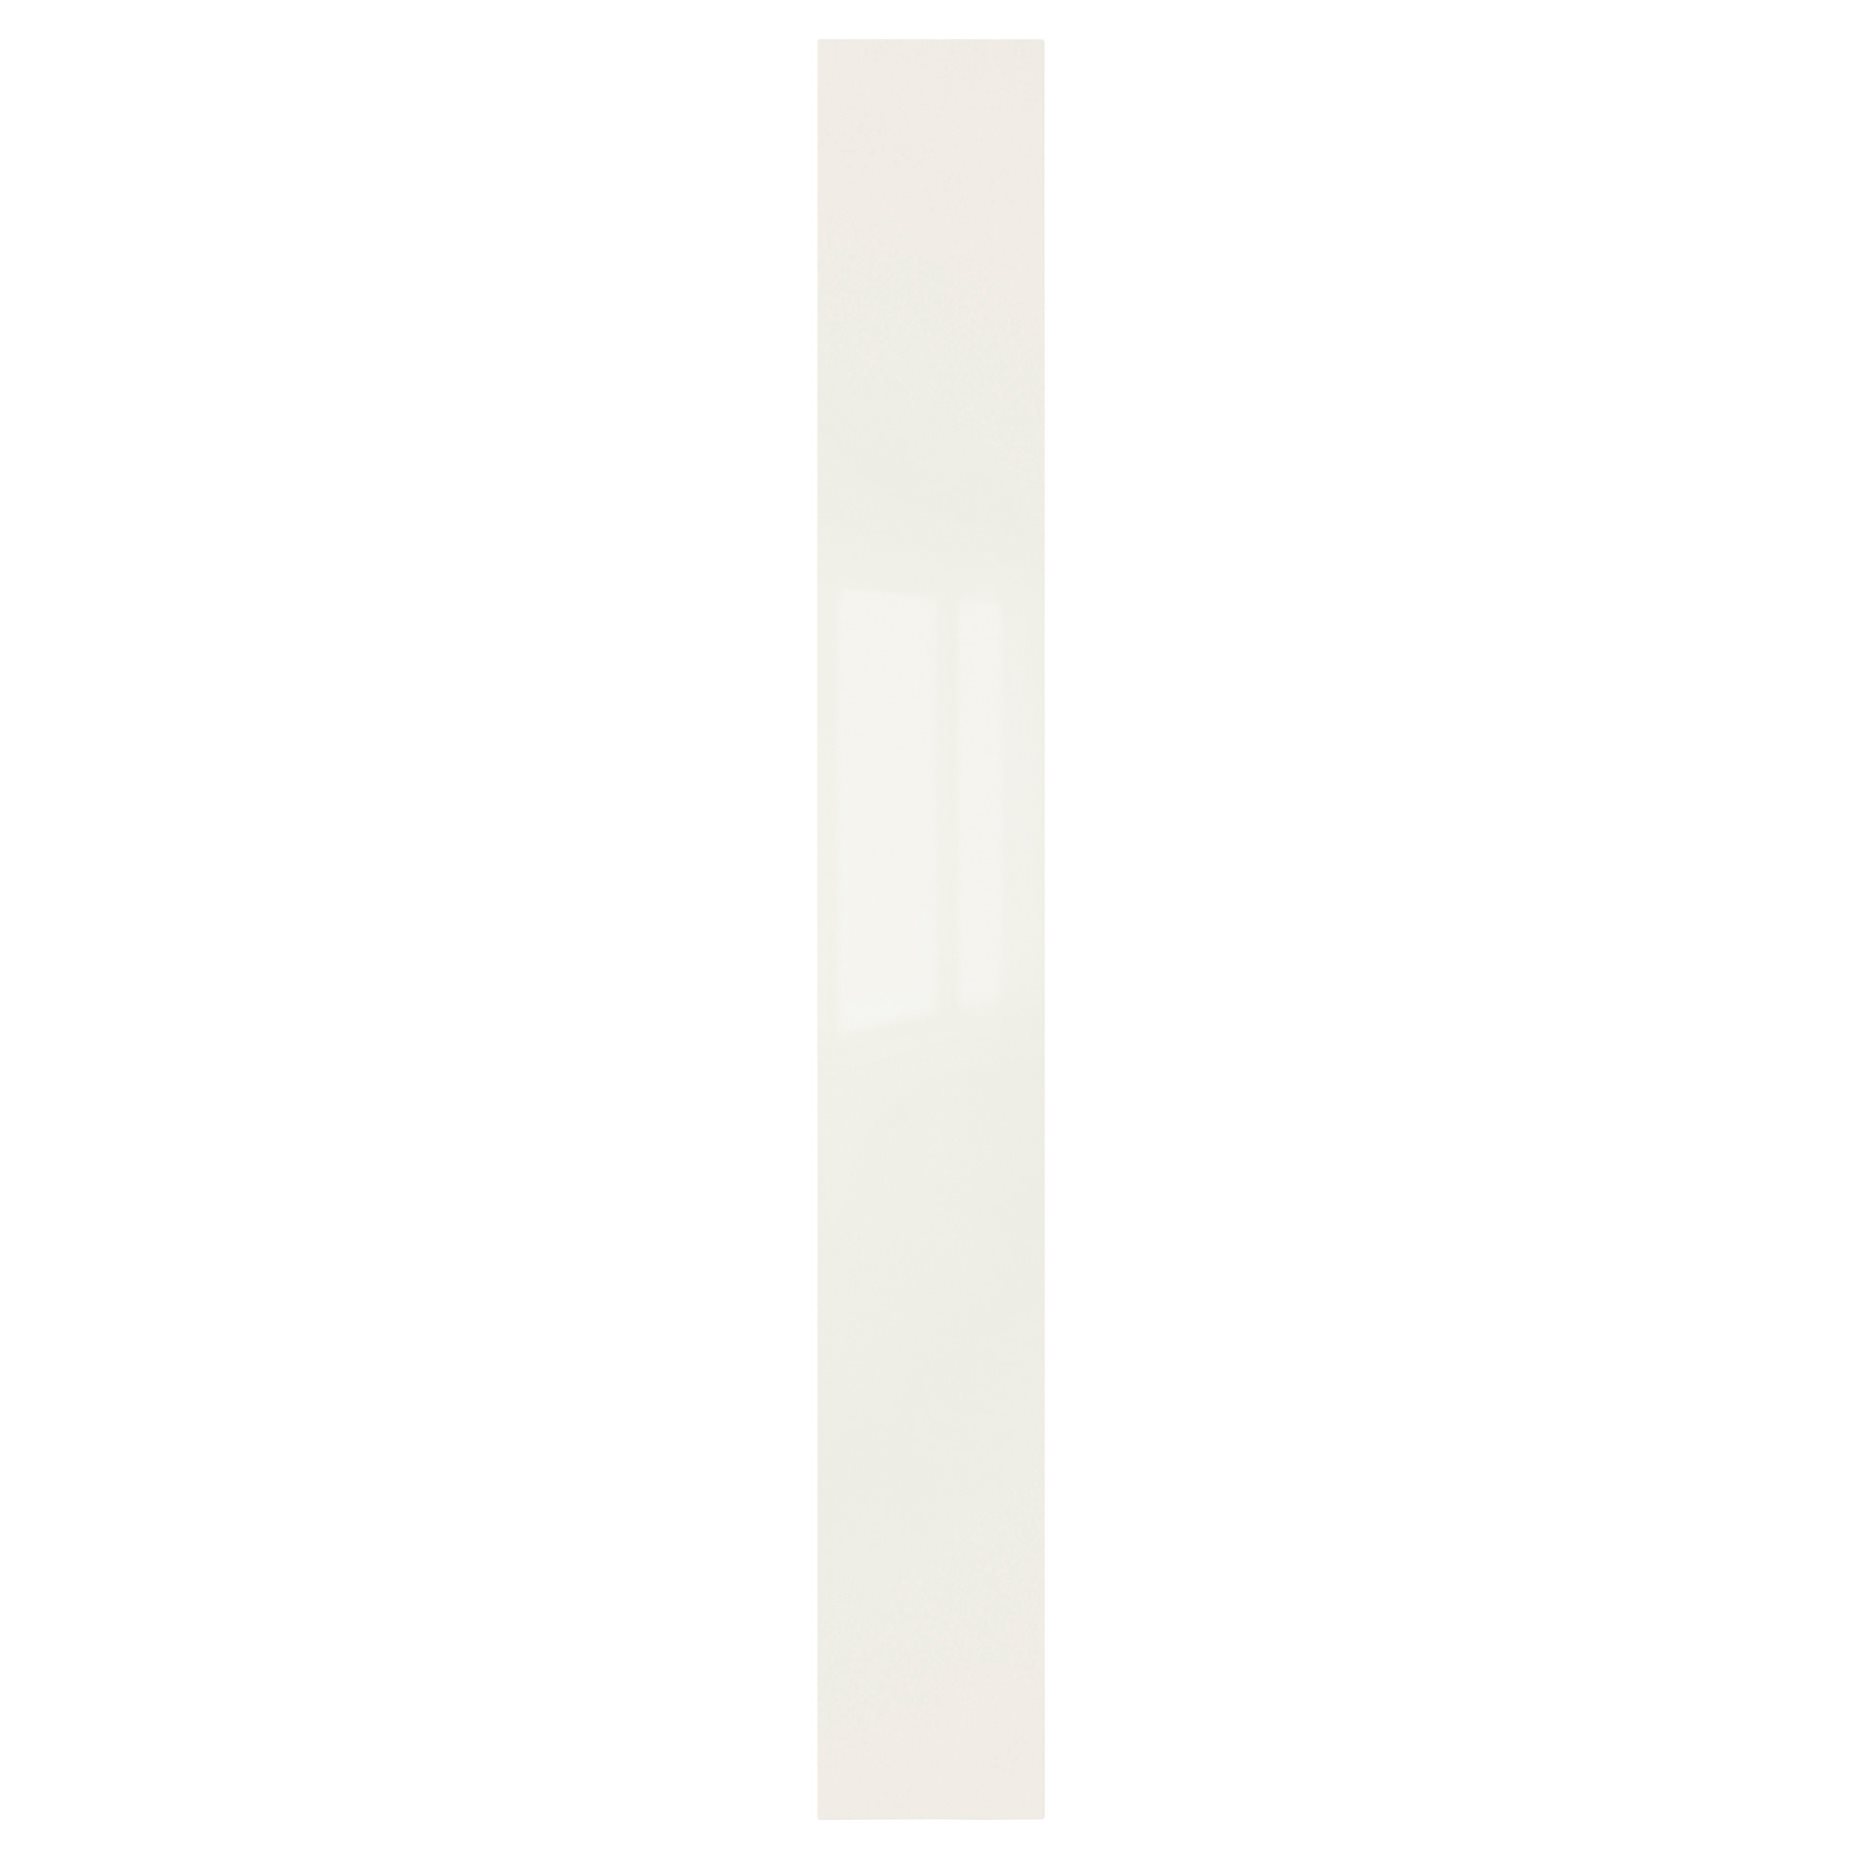 FARDAL, door with hinges/high-gloss, 25x229 cm, 391.881.76